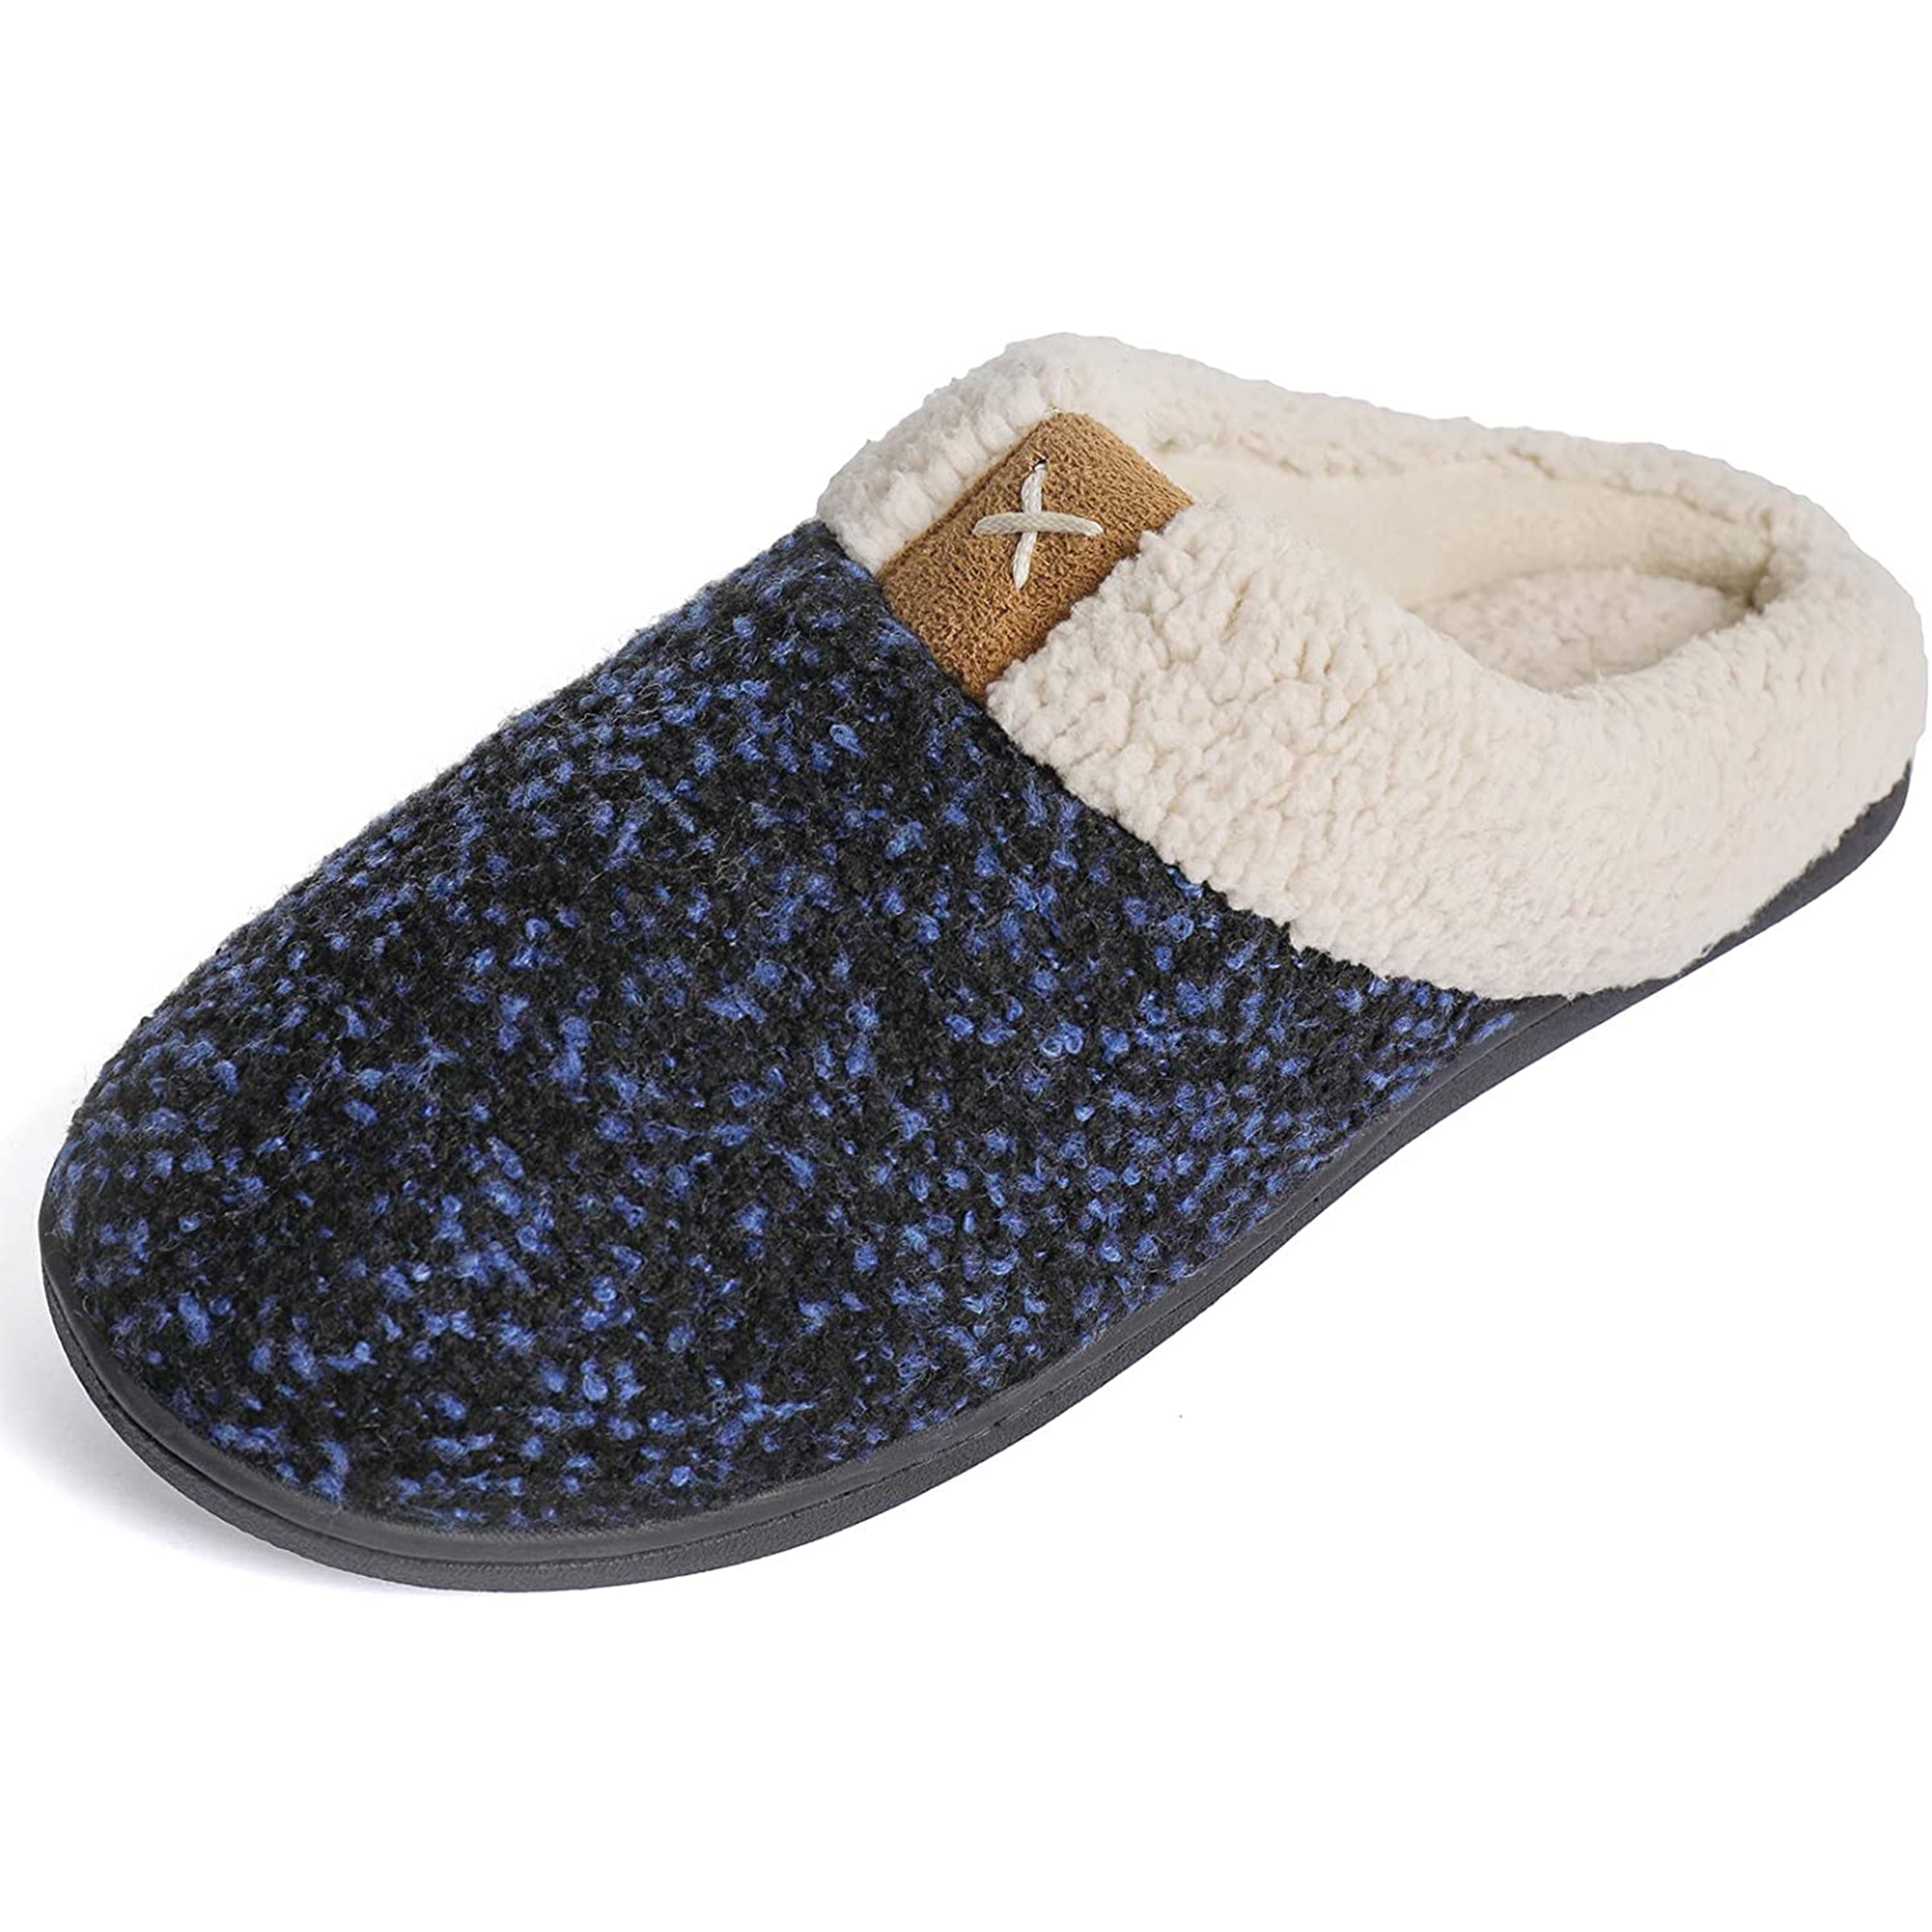 Outdoor Anti-Skid Rubber Sole Womens Comfort Memory Foam Slippers Plush Lined House Shoes Indoor 